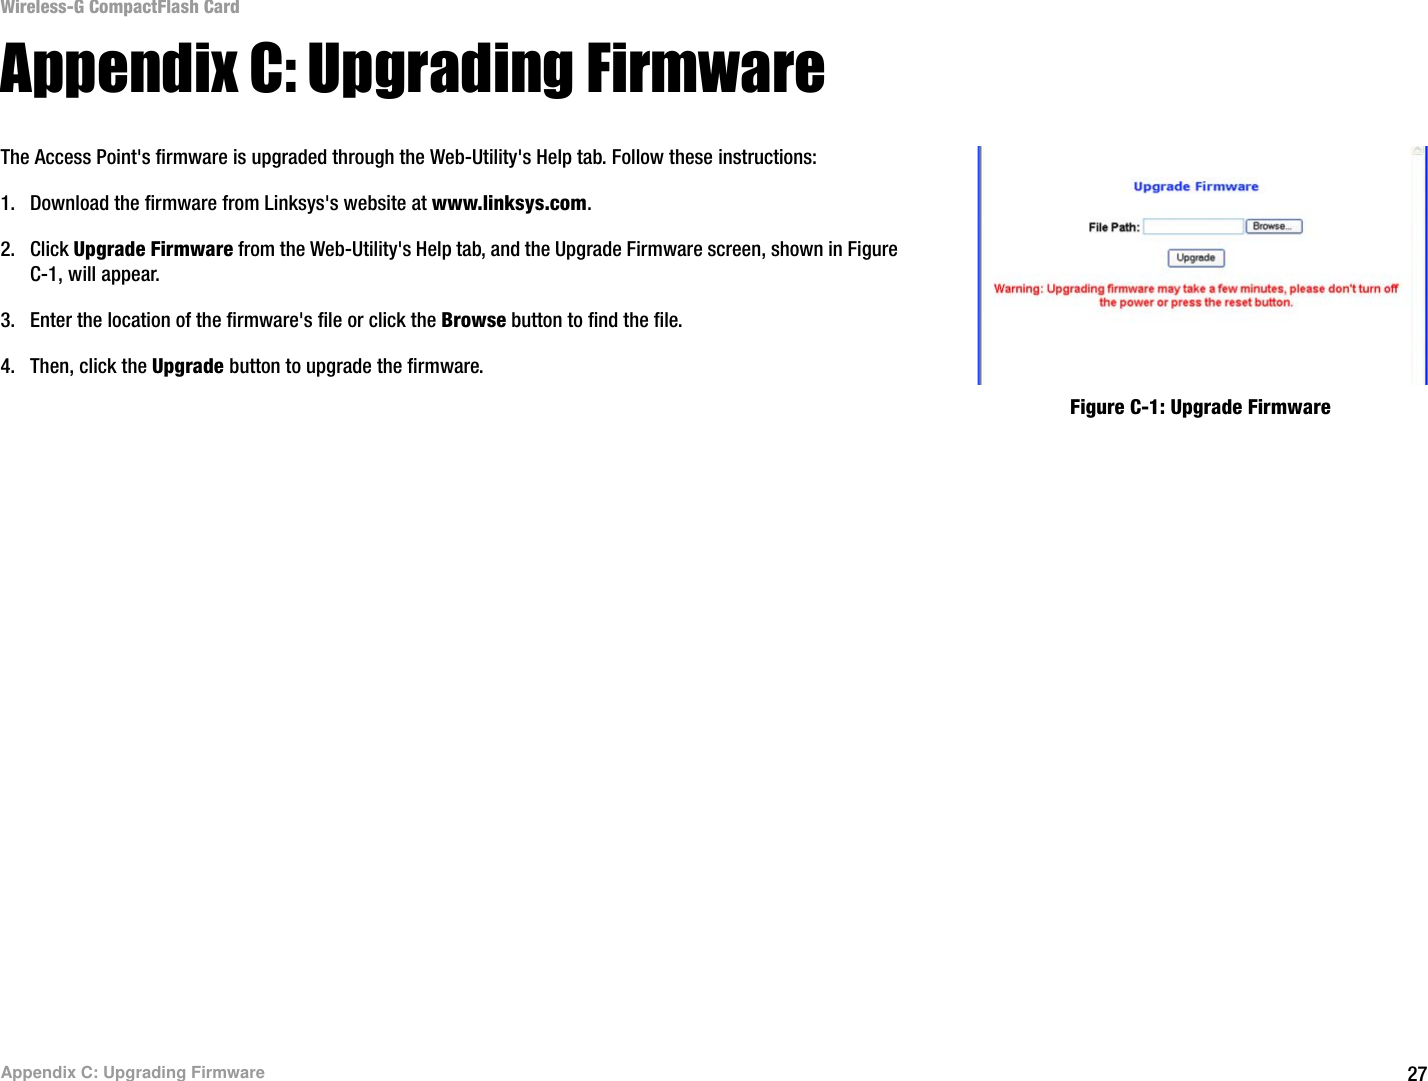 27Appendix C: Upgrading FirmwareWireless-G CompactFlash CardAppendix C: Upgrading FirmwareThe Access Point&apos;s firmware is upgraded through the Web-Utility&apos;s Help tab. Follow these instructions:1. Download the firmware from Linksys&apos;s website at www.linksys.com. 2. Click Upgrade Firmware from the Web-Utility&apos;s Help tab, and the Upgrade Firmware screen, shown in Figure C-1, will appear.3. Enter the location of the firmware&apos;s file or click the Browse button to find the file. 4. Then, click the Upgrade button to upgrade the firmware.Figure C-1: Upgrade Firmware